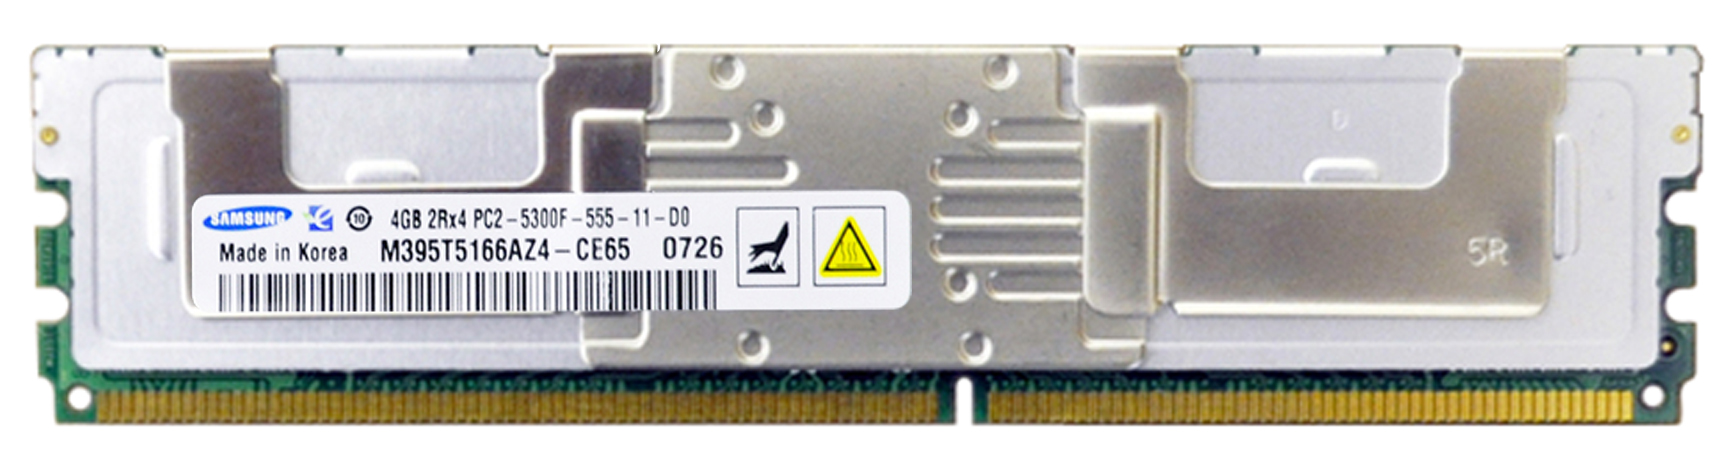 3DDLA51179590 3D Memory 8GB Kit (2 X 4GB) PC2-5300 DDR2-667MHz ECC Fully Buffered CL5 240-Pin DIMM Memory for Precision WorkStation 720 P/N (compatible with A51179590, KVR667D2D4F5K2/8G, KTH-XW667/8G, KTA-XE667K2/8G, KFJ-BX667K2/8G)